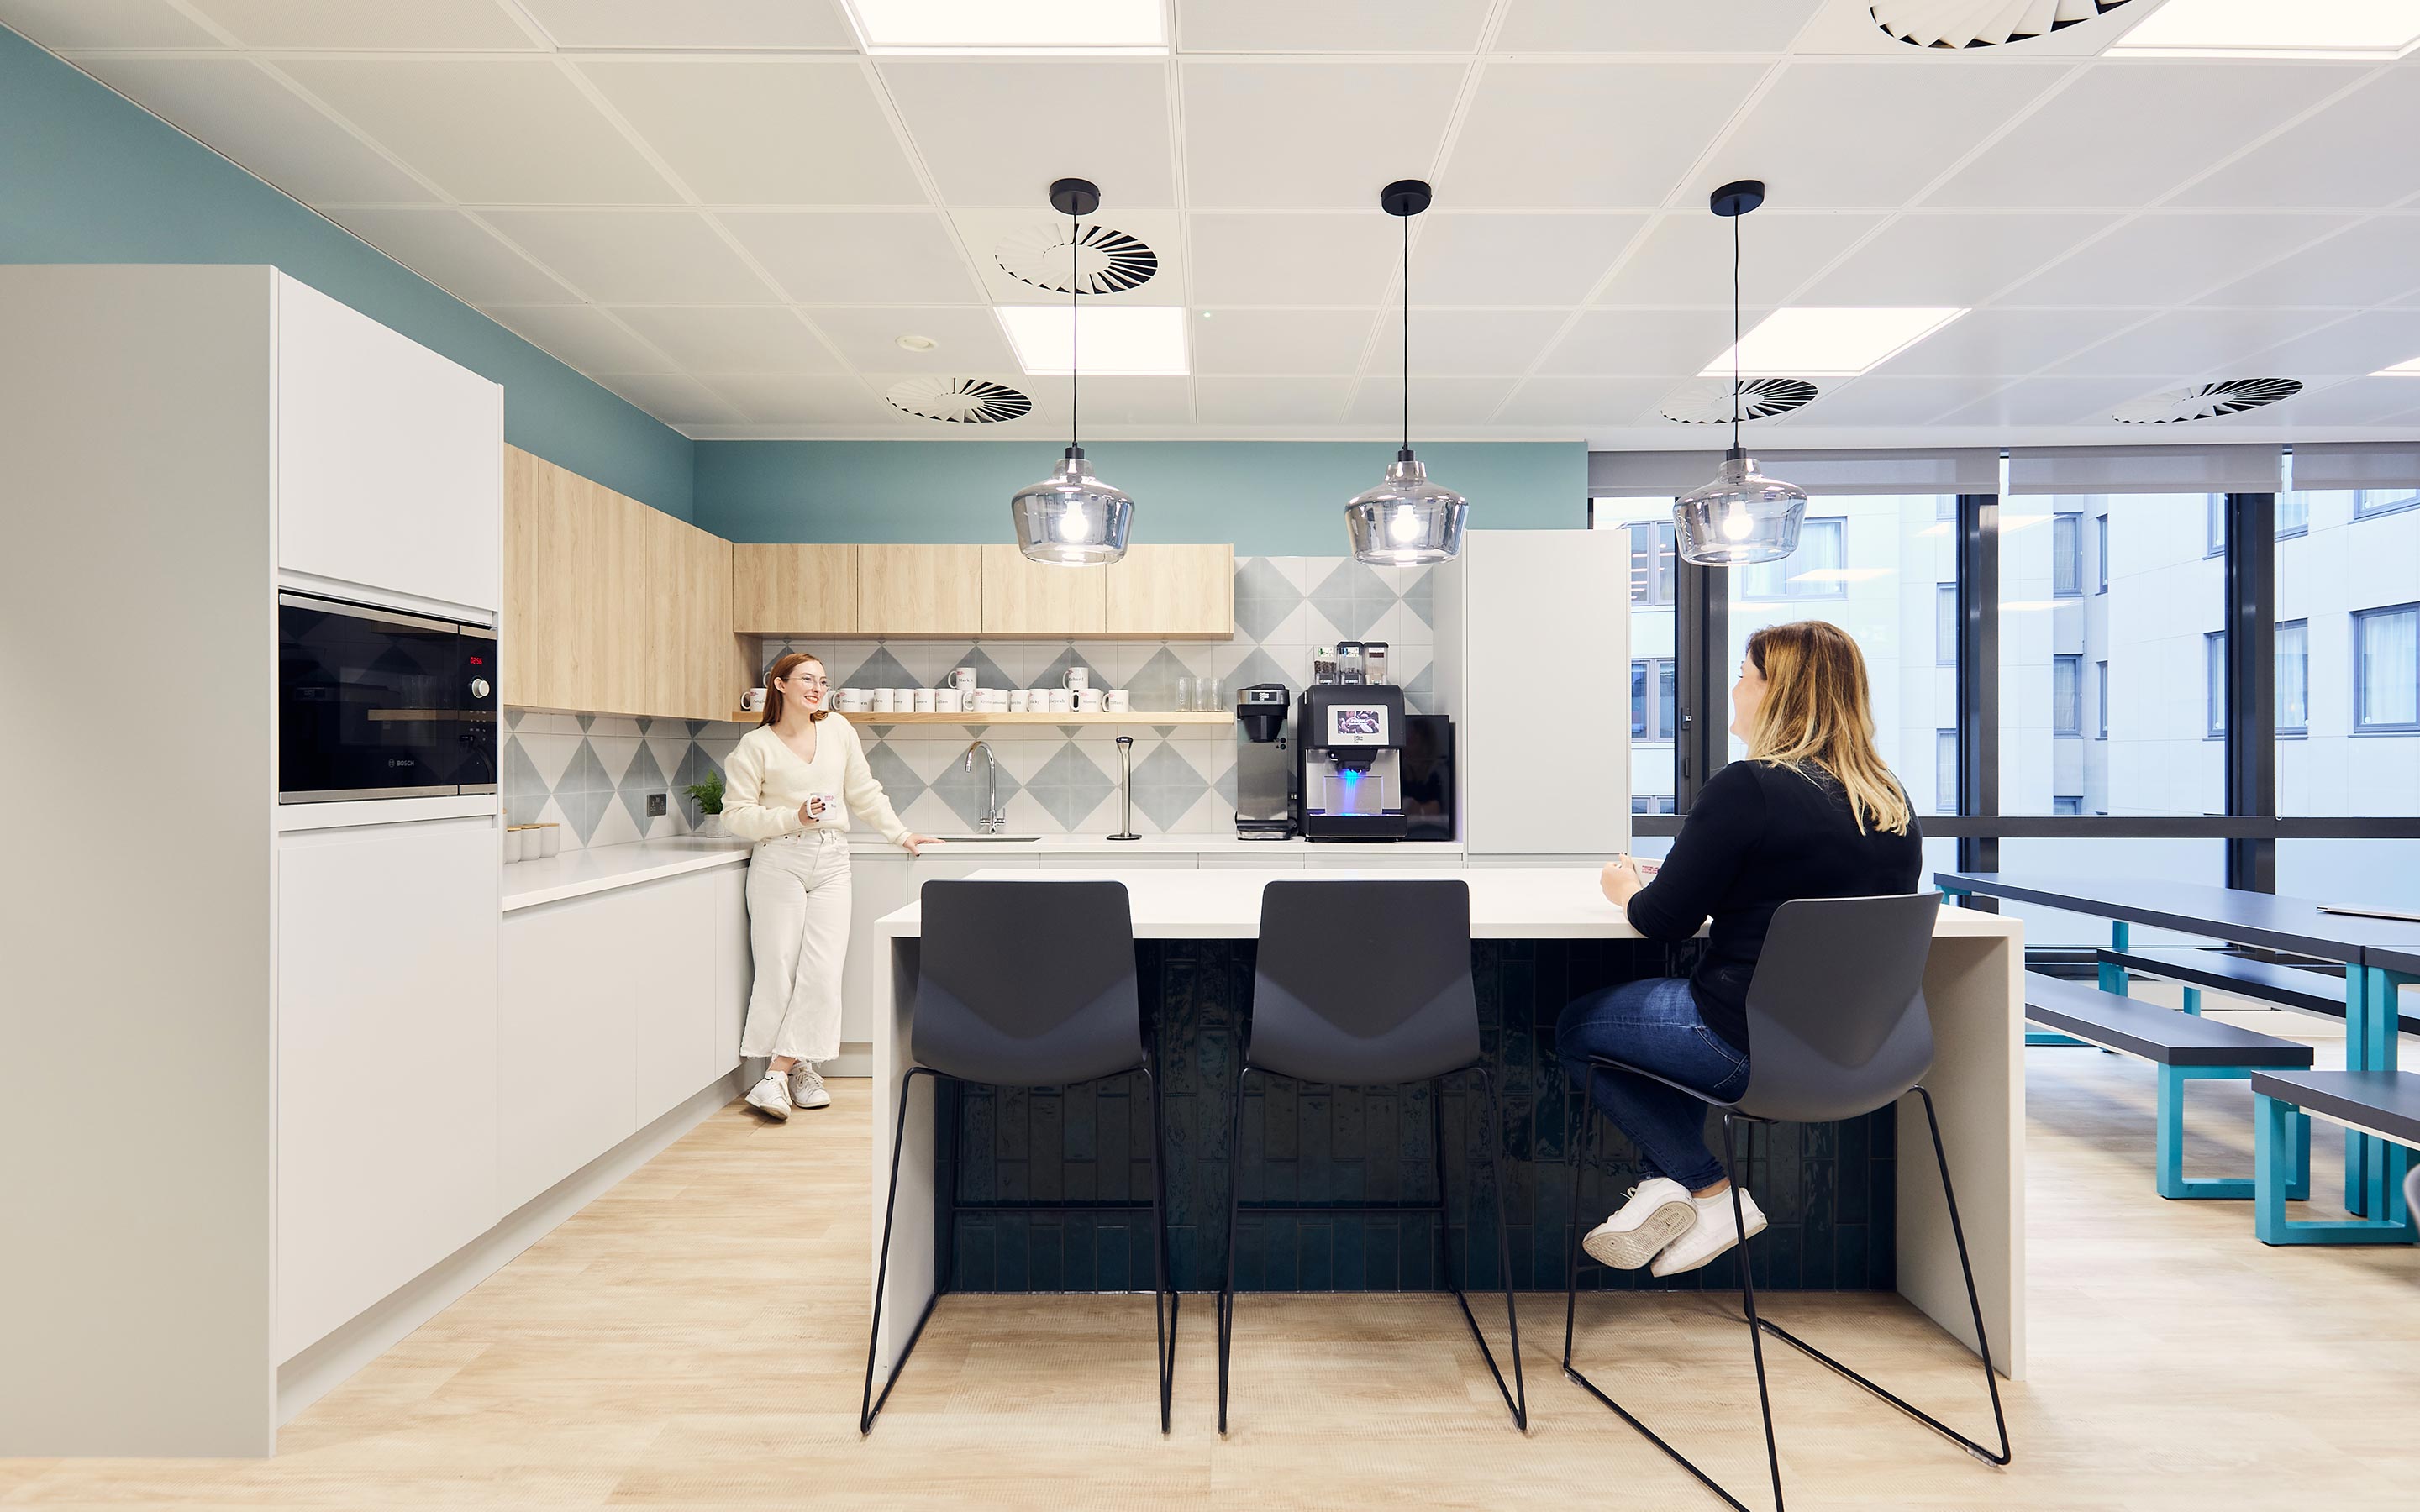 The images shows employees talking at an office kitchen counter. The aesthetic is bright, and welcoming